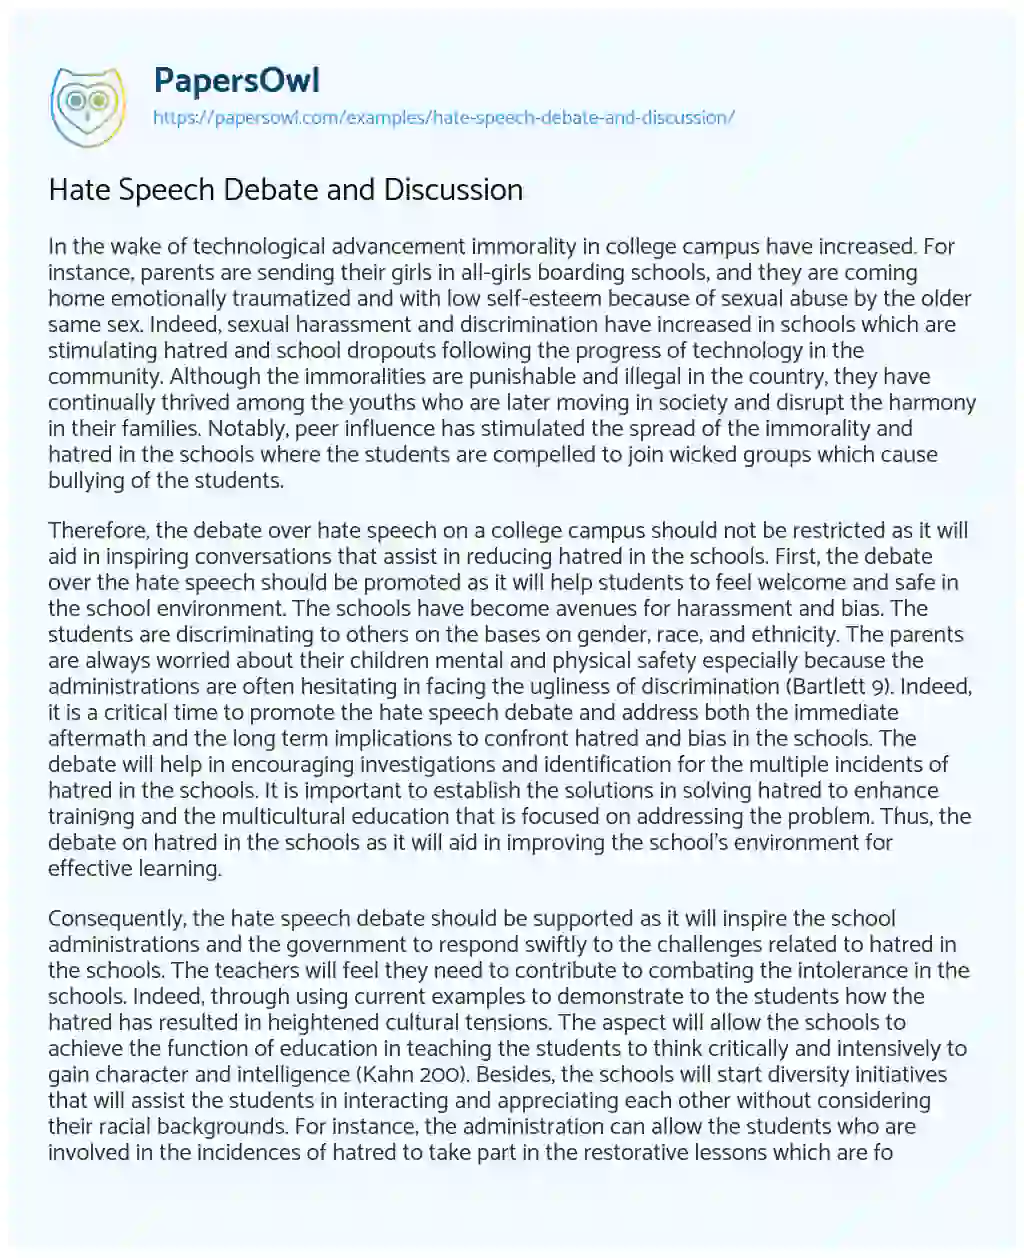 Essay on Hate Speech Debate and Discussion